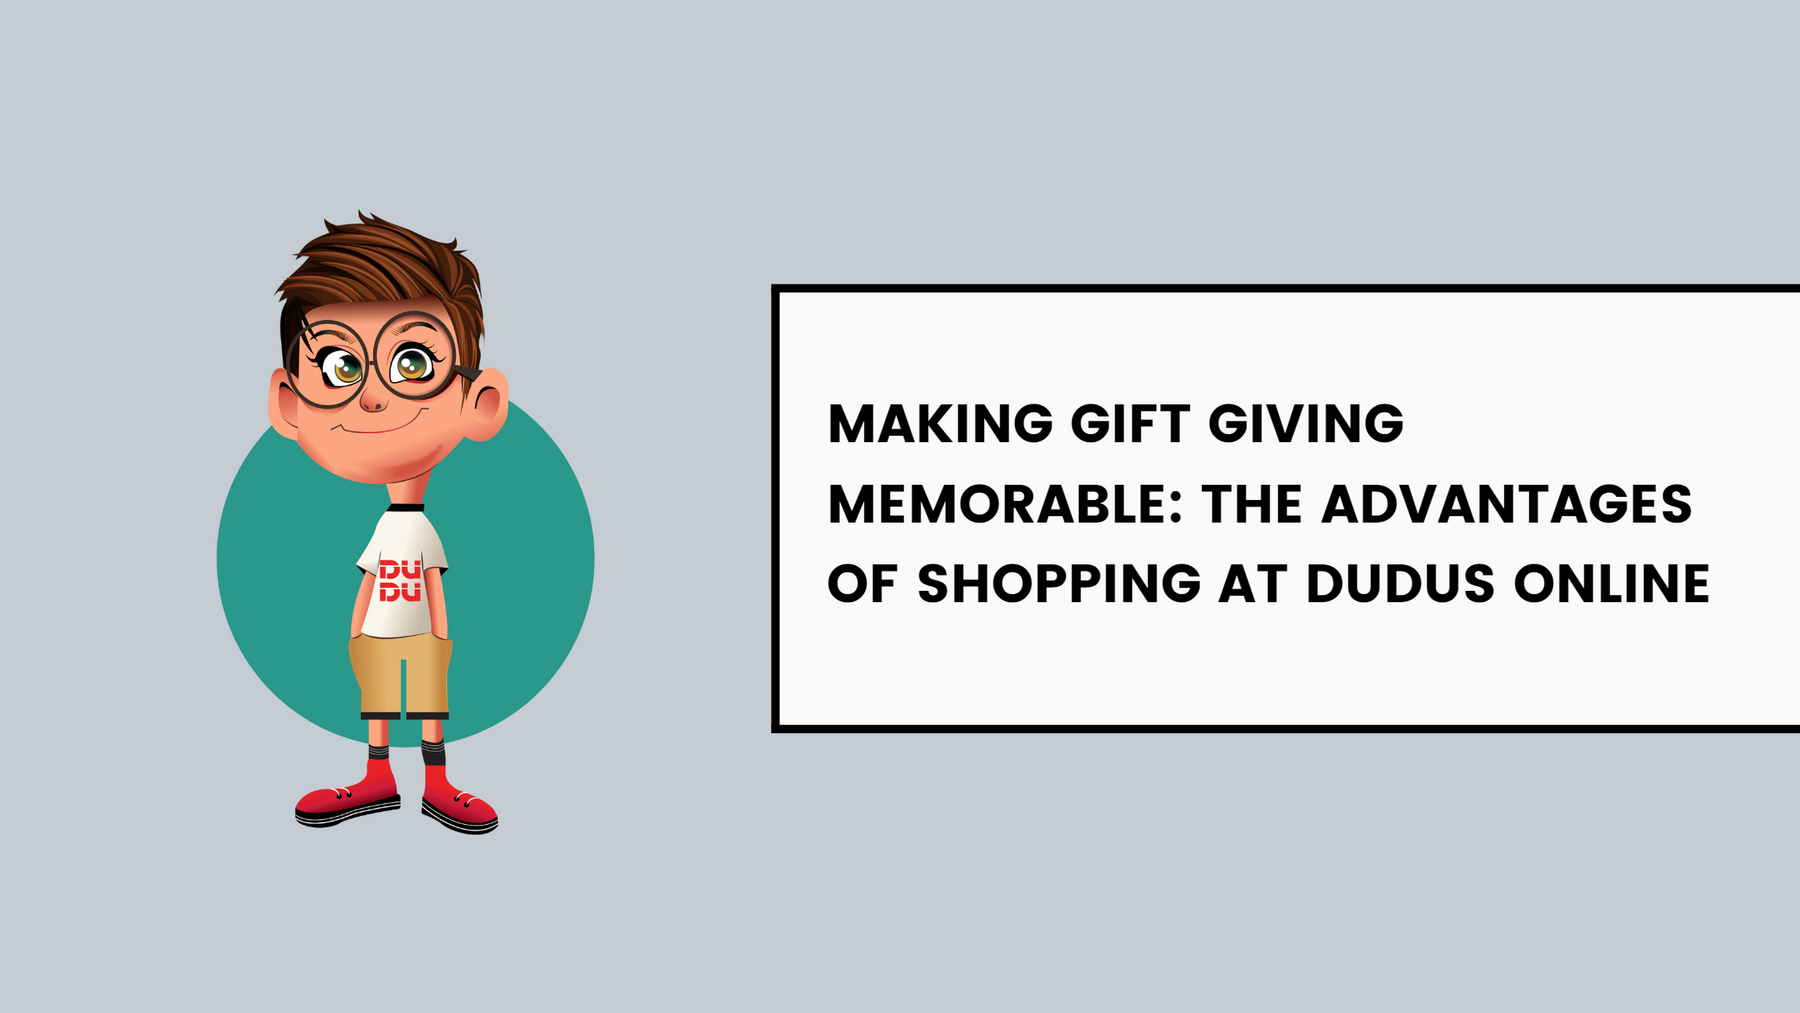 Making Gift Giving Memorable: The Advantages Of Shopping At Dudus Online